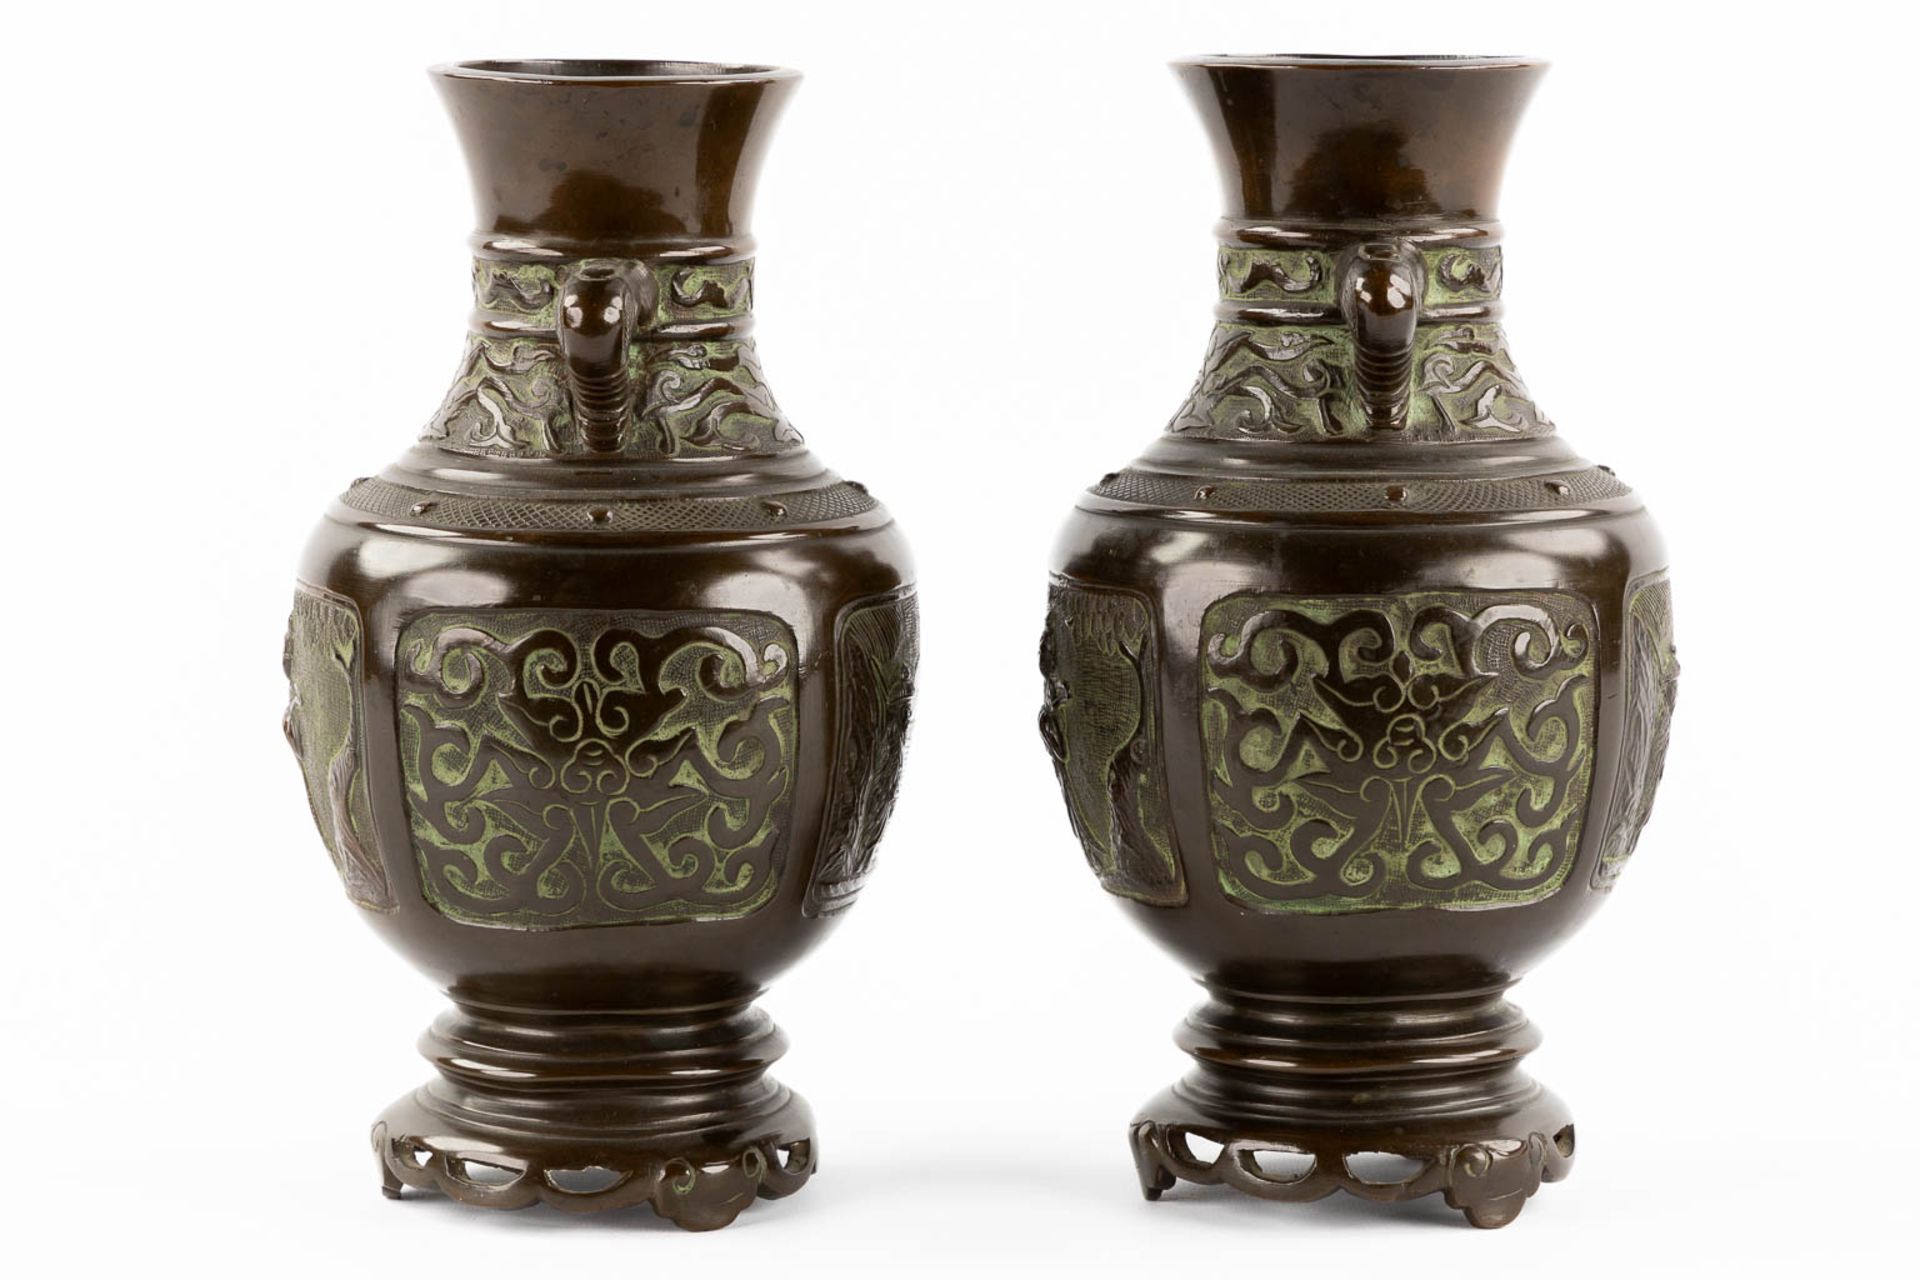 A pair of Japanese vases, patinated bronze. 19th C. (H:26 x D:14 cm) - Image 4 of 11